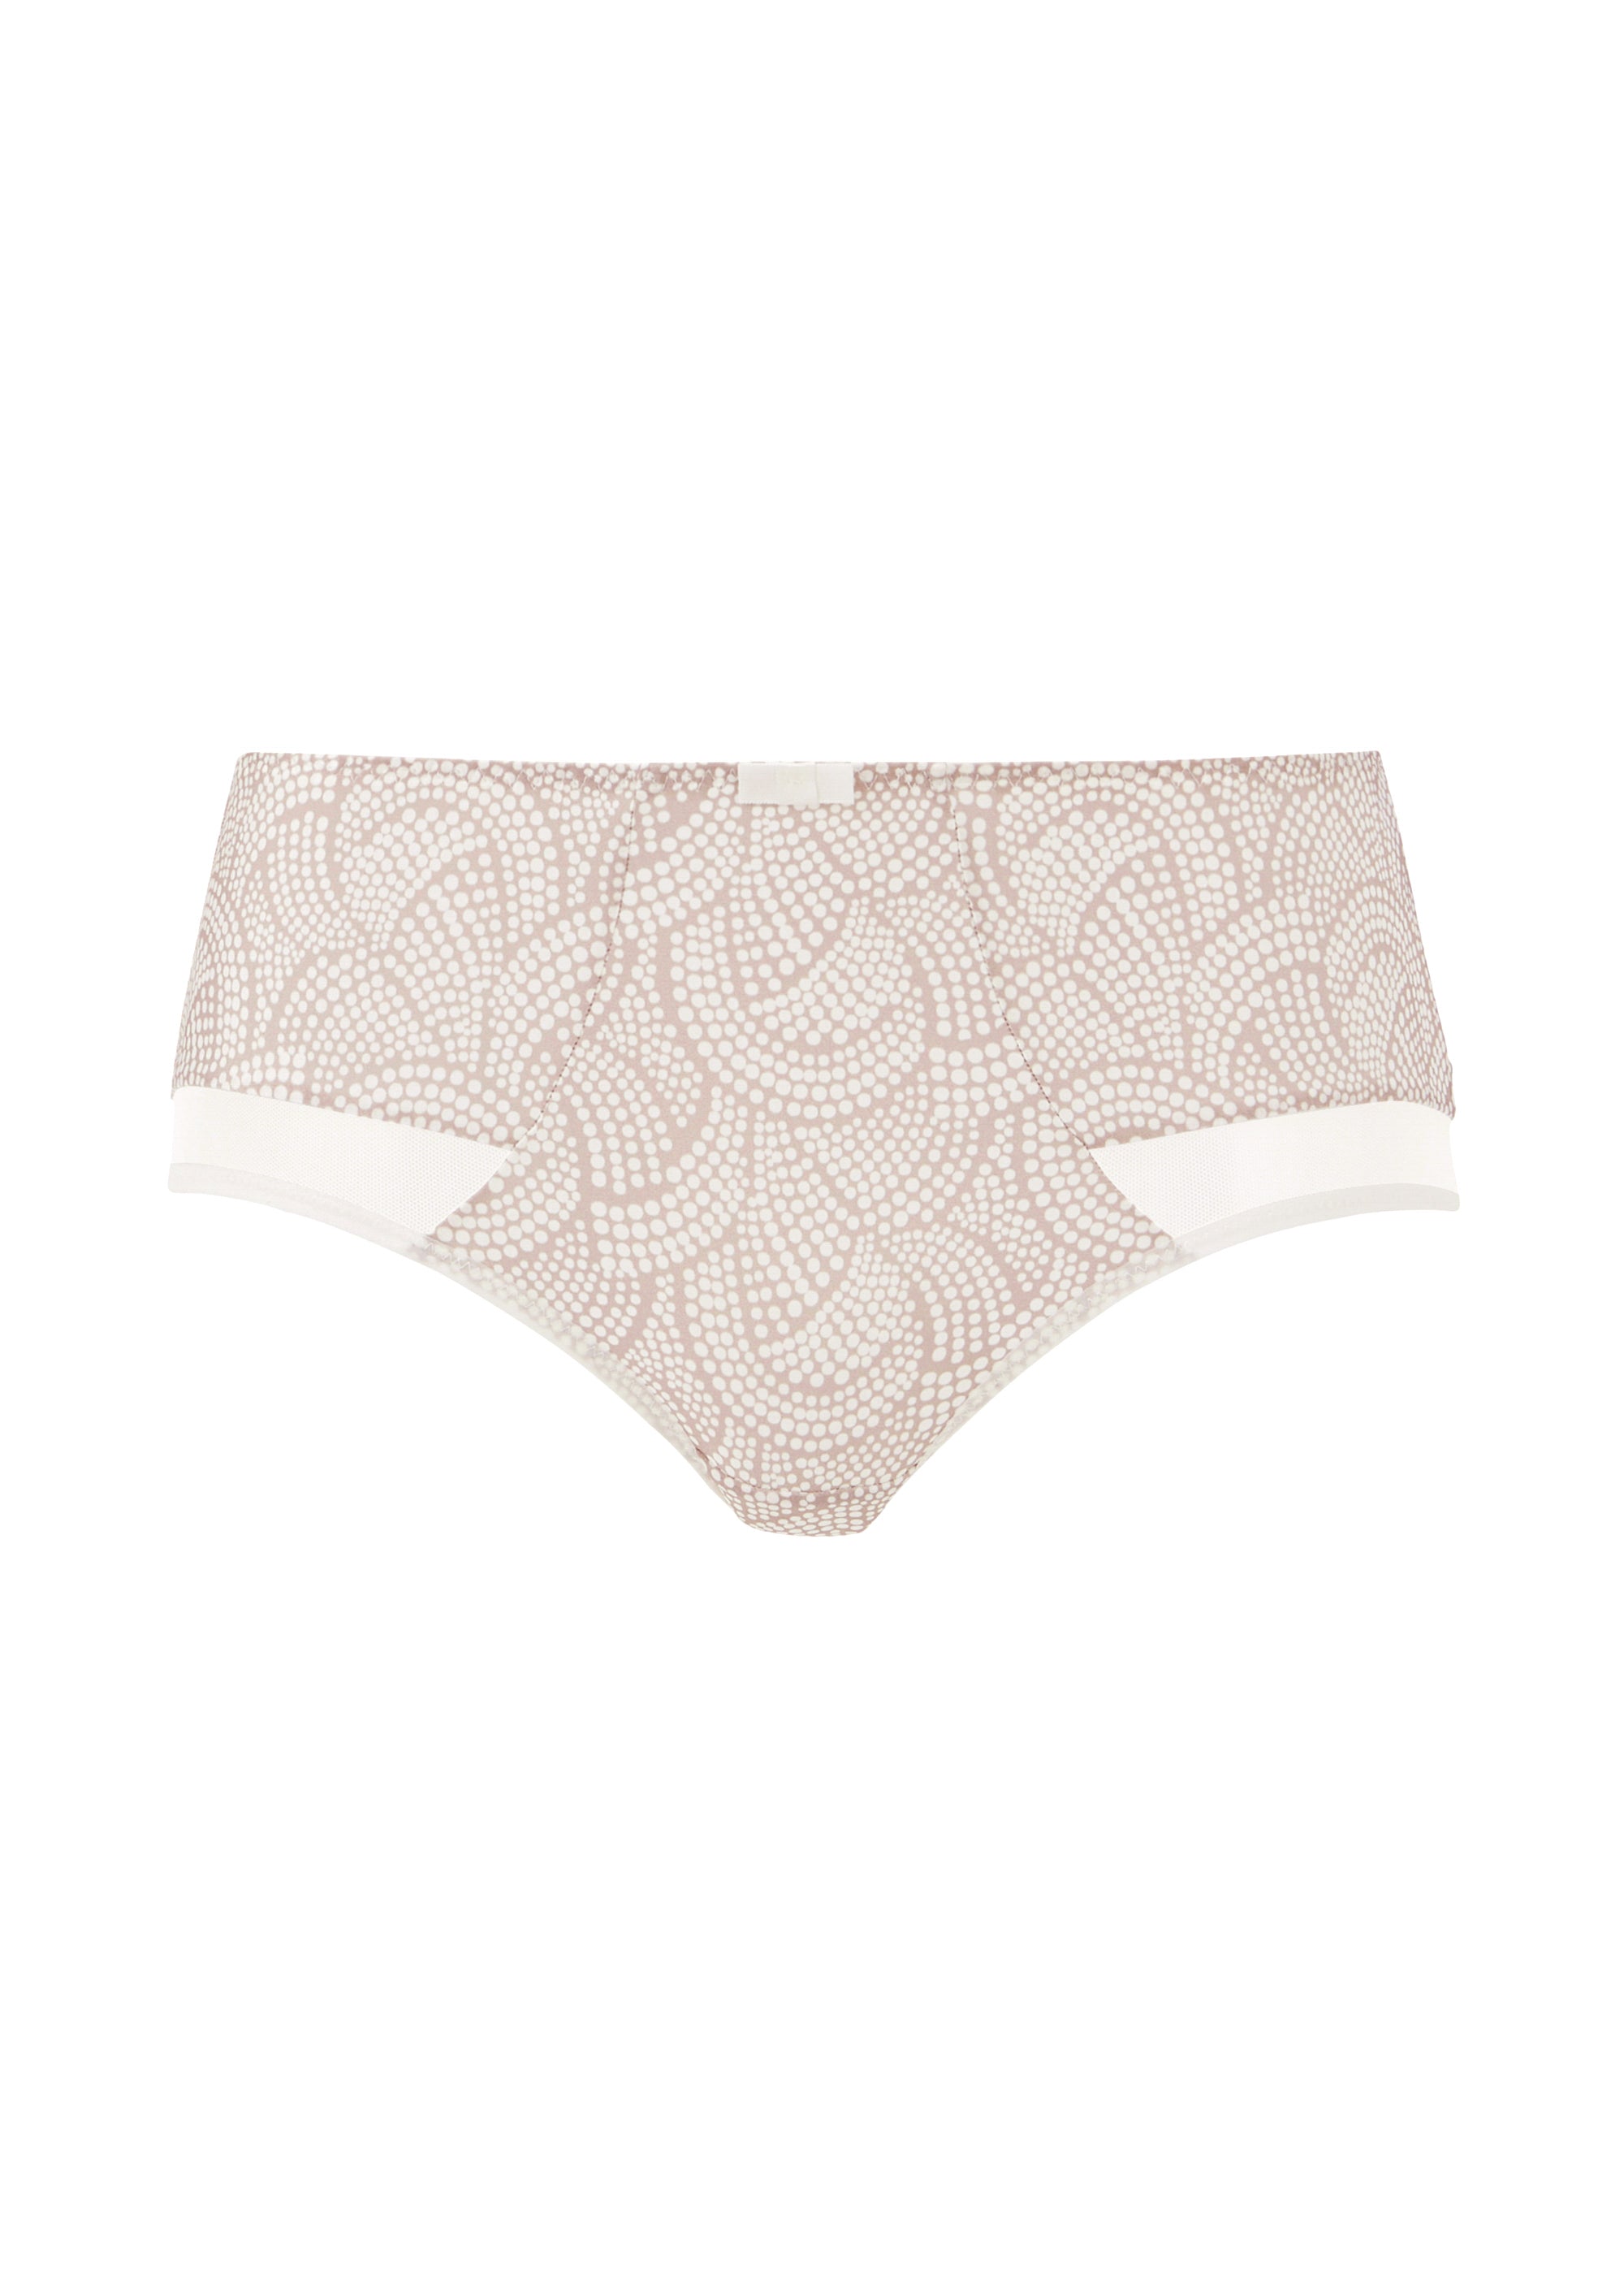 Shorty Complice Taupe Graphic Print